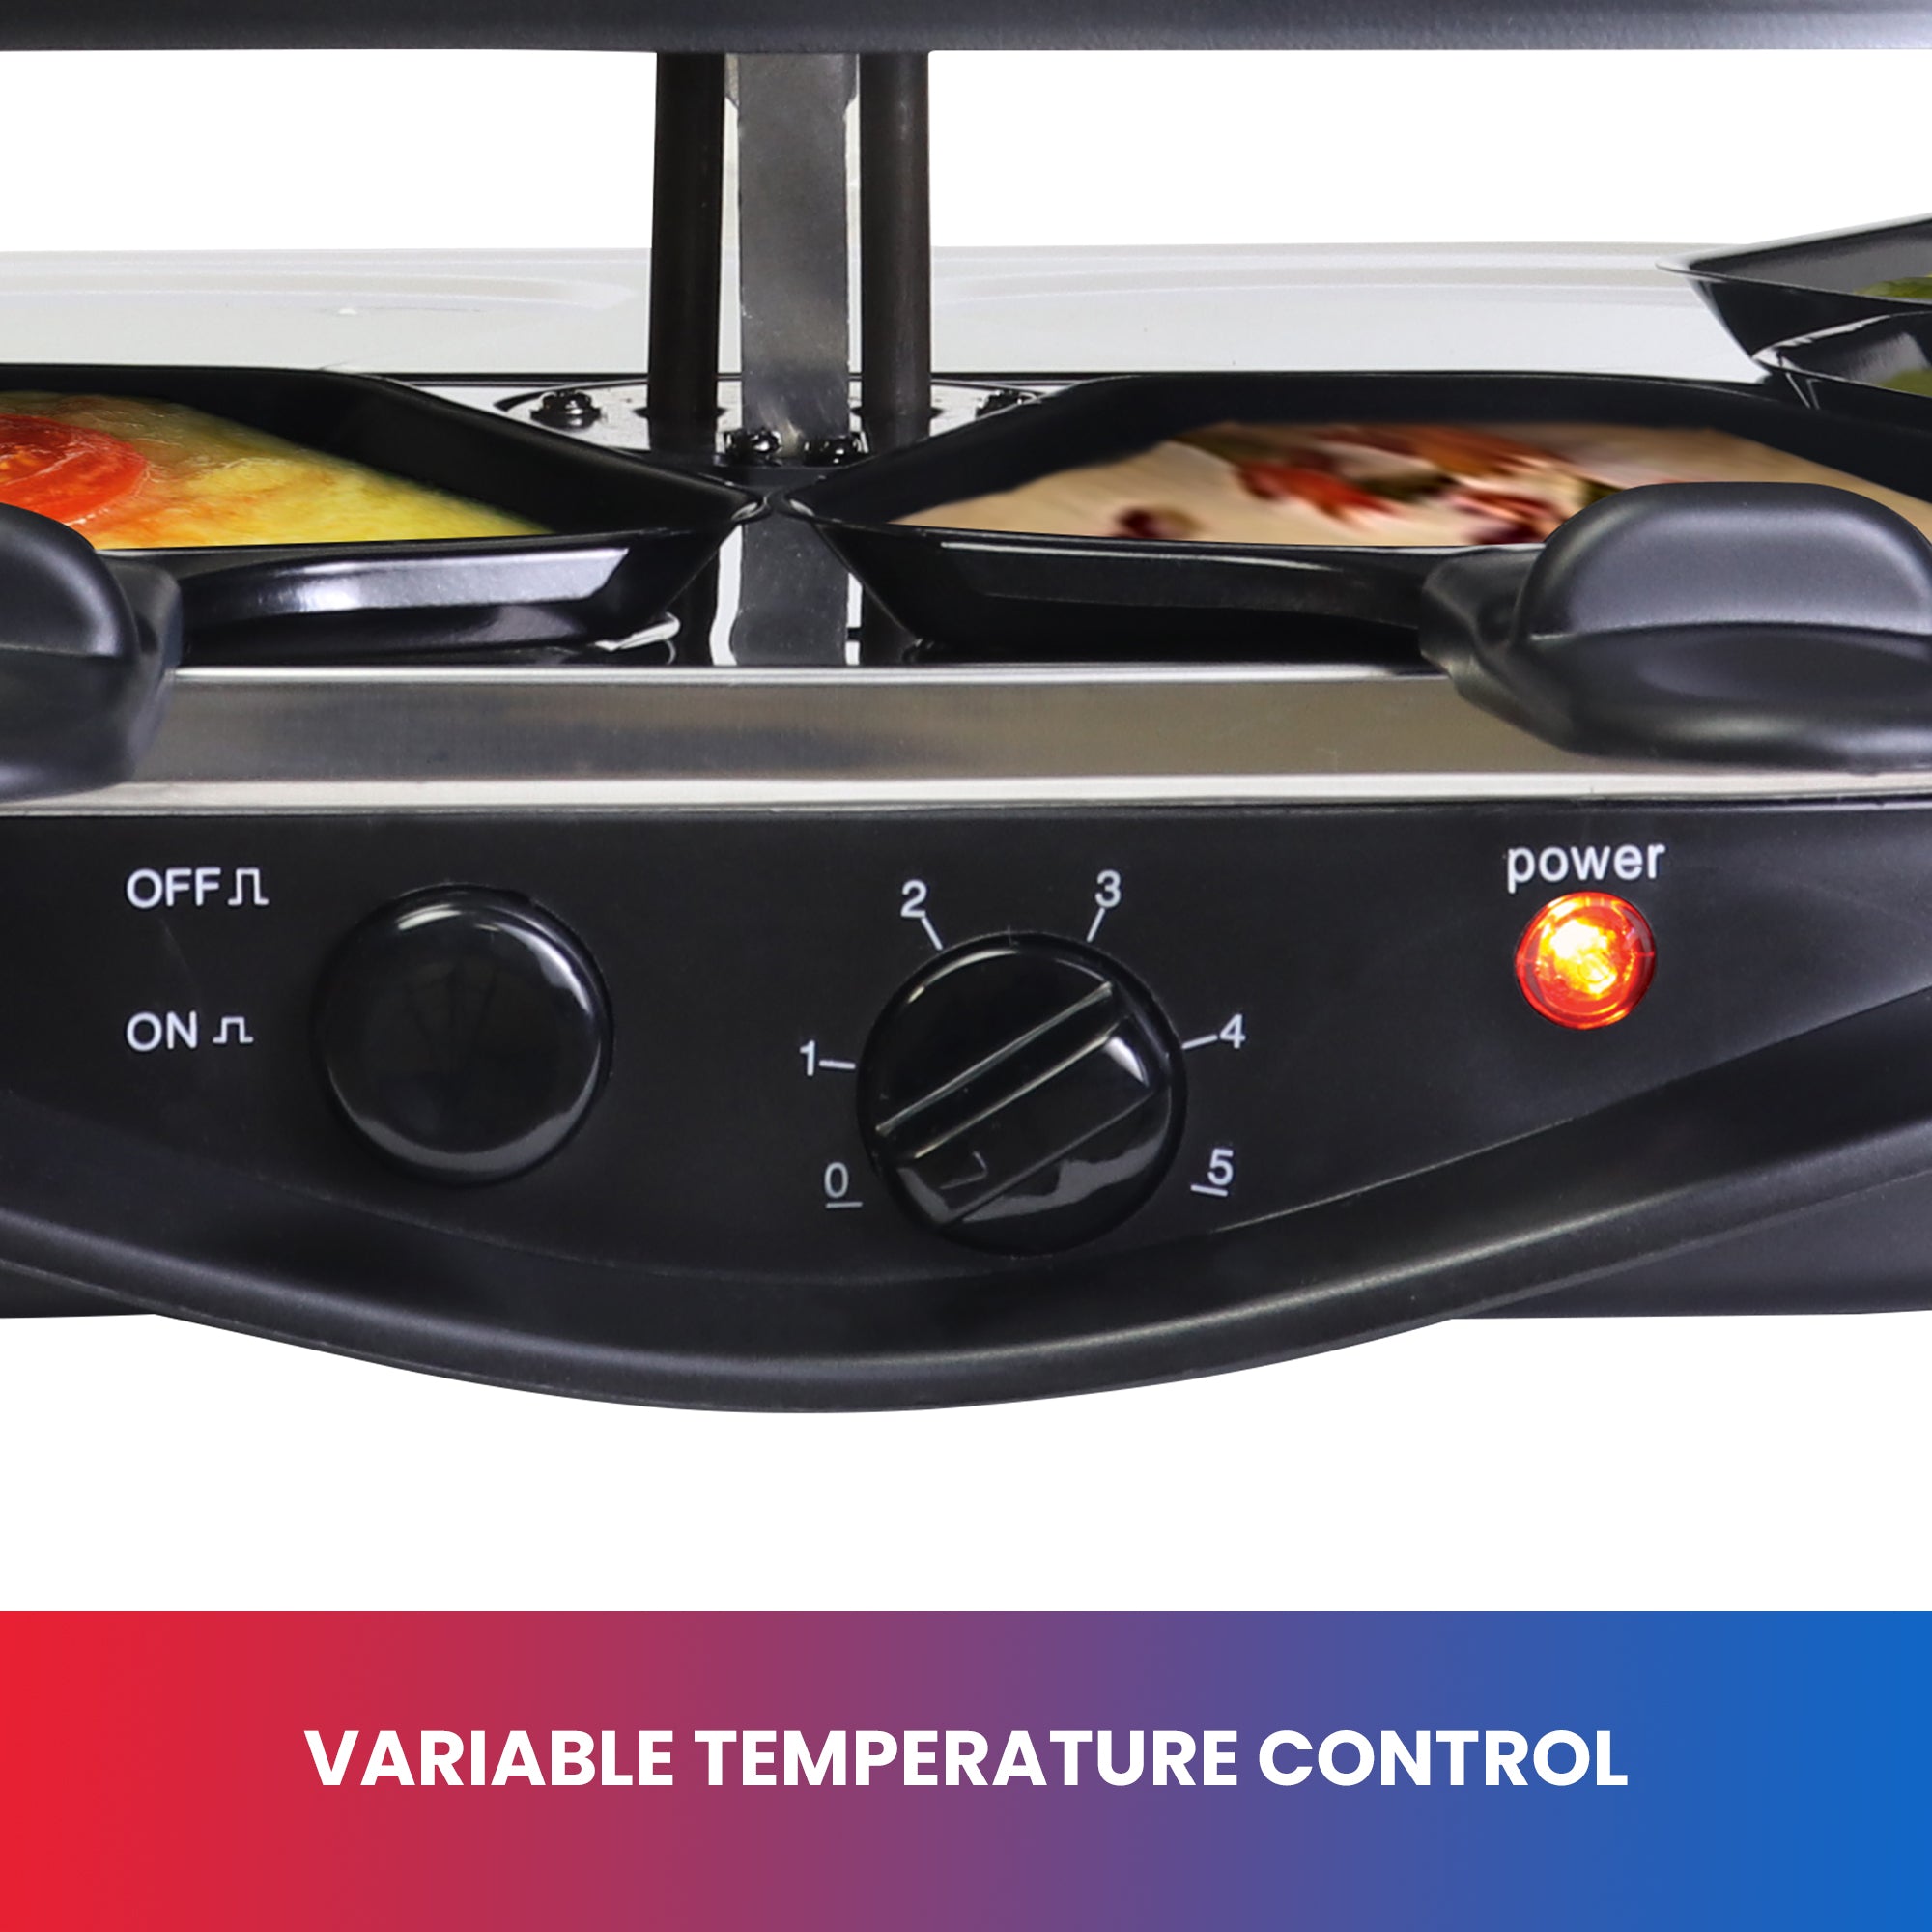 Closeup image of raclette grill controls and LED power indicator. Text below reads, "Variable temperature control"